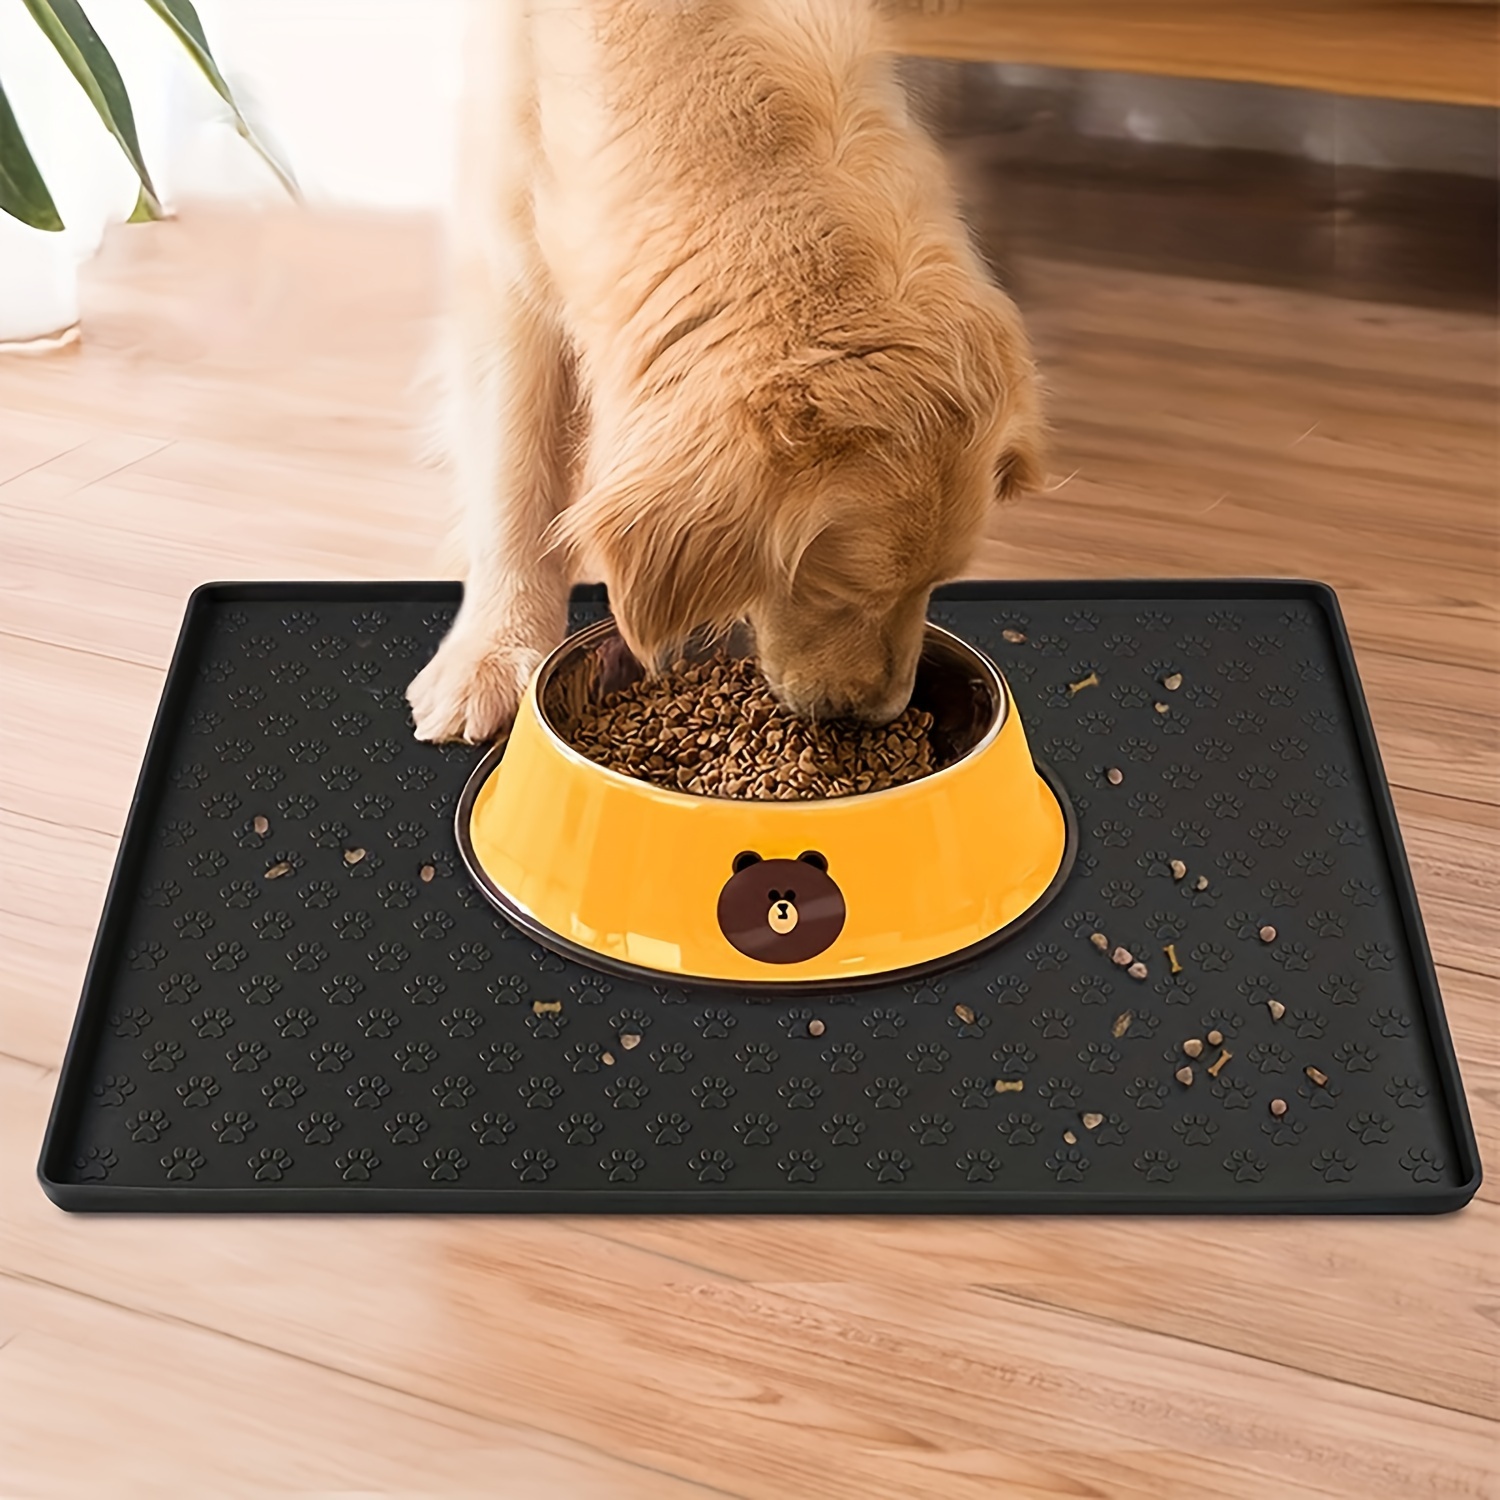 EIOKIT Dog Food Mat,Silicone Waterproof Dog Cat Food Tray,Non Slip Pet Bowl  Mats Placemat,Size:(18.5 x 11.5) 0.6 Raised Edge,Suitable for Most